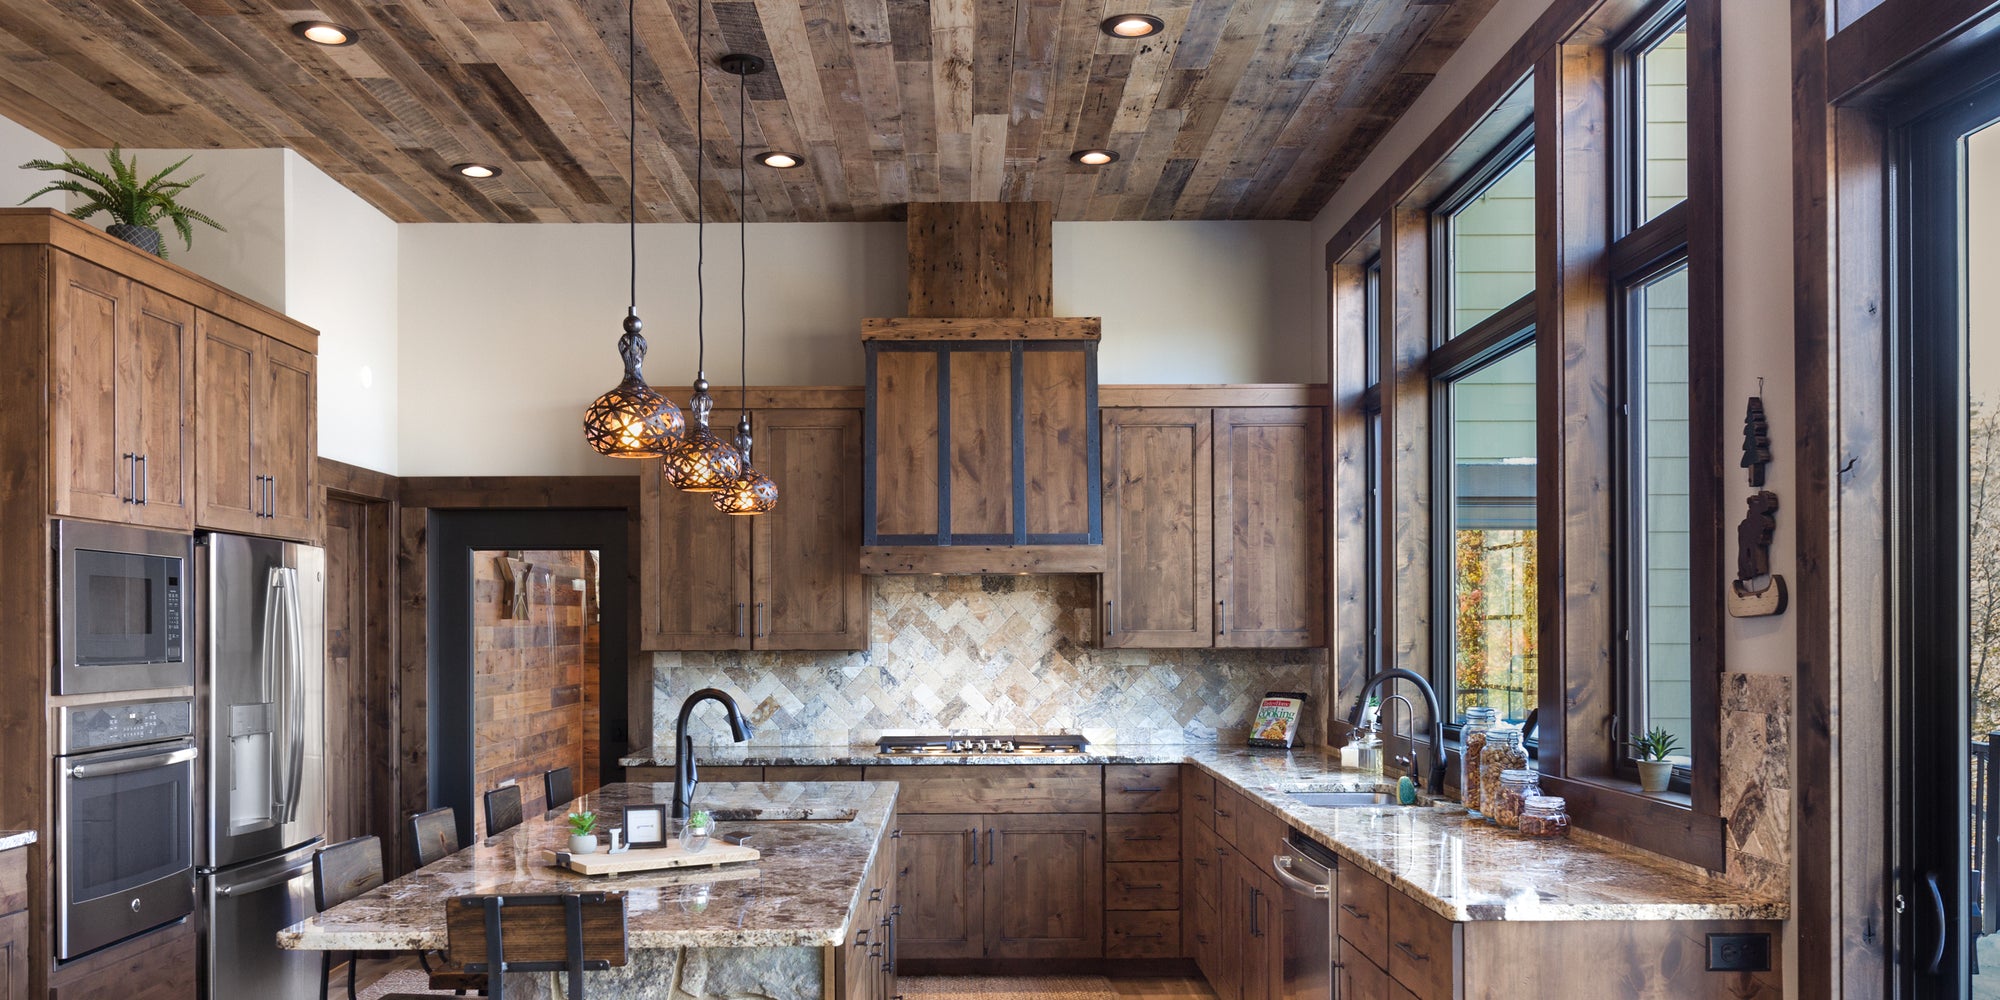 Reclaimed Wood Ceiling Paneling | Wood Ceiling Planking | Dakota Timber Company Wood Paneling | Urban Lumber | Barnwood Ceiling Paneling | Minnesota Lake Home Kitchen Design | Rustic Kitchen